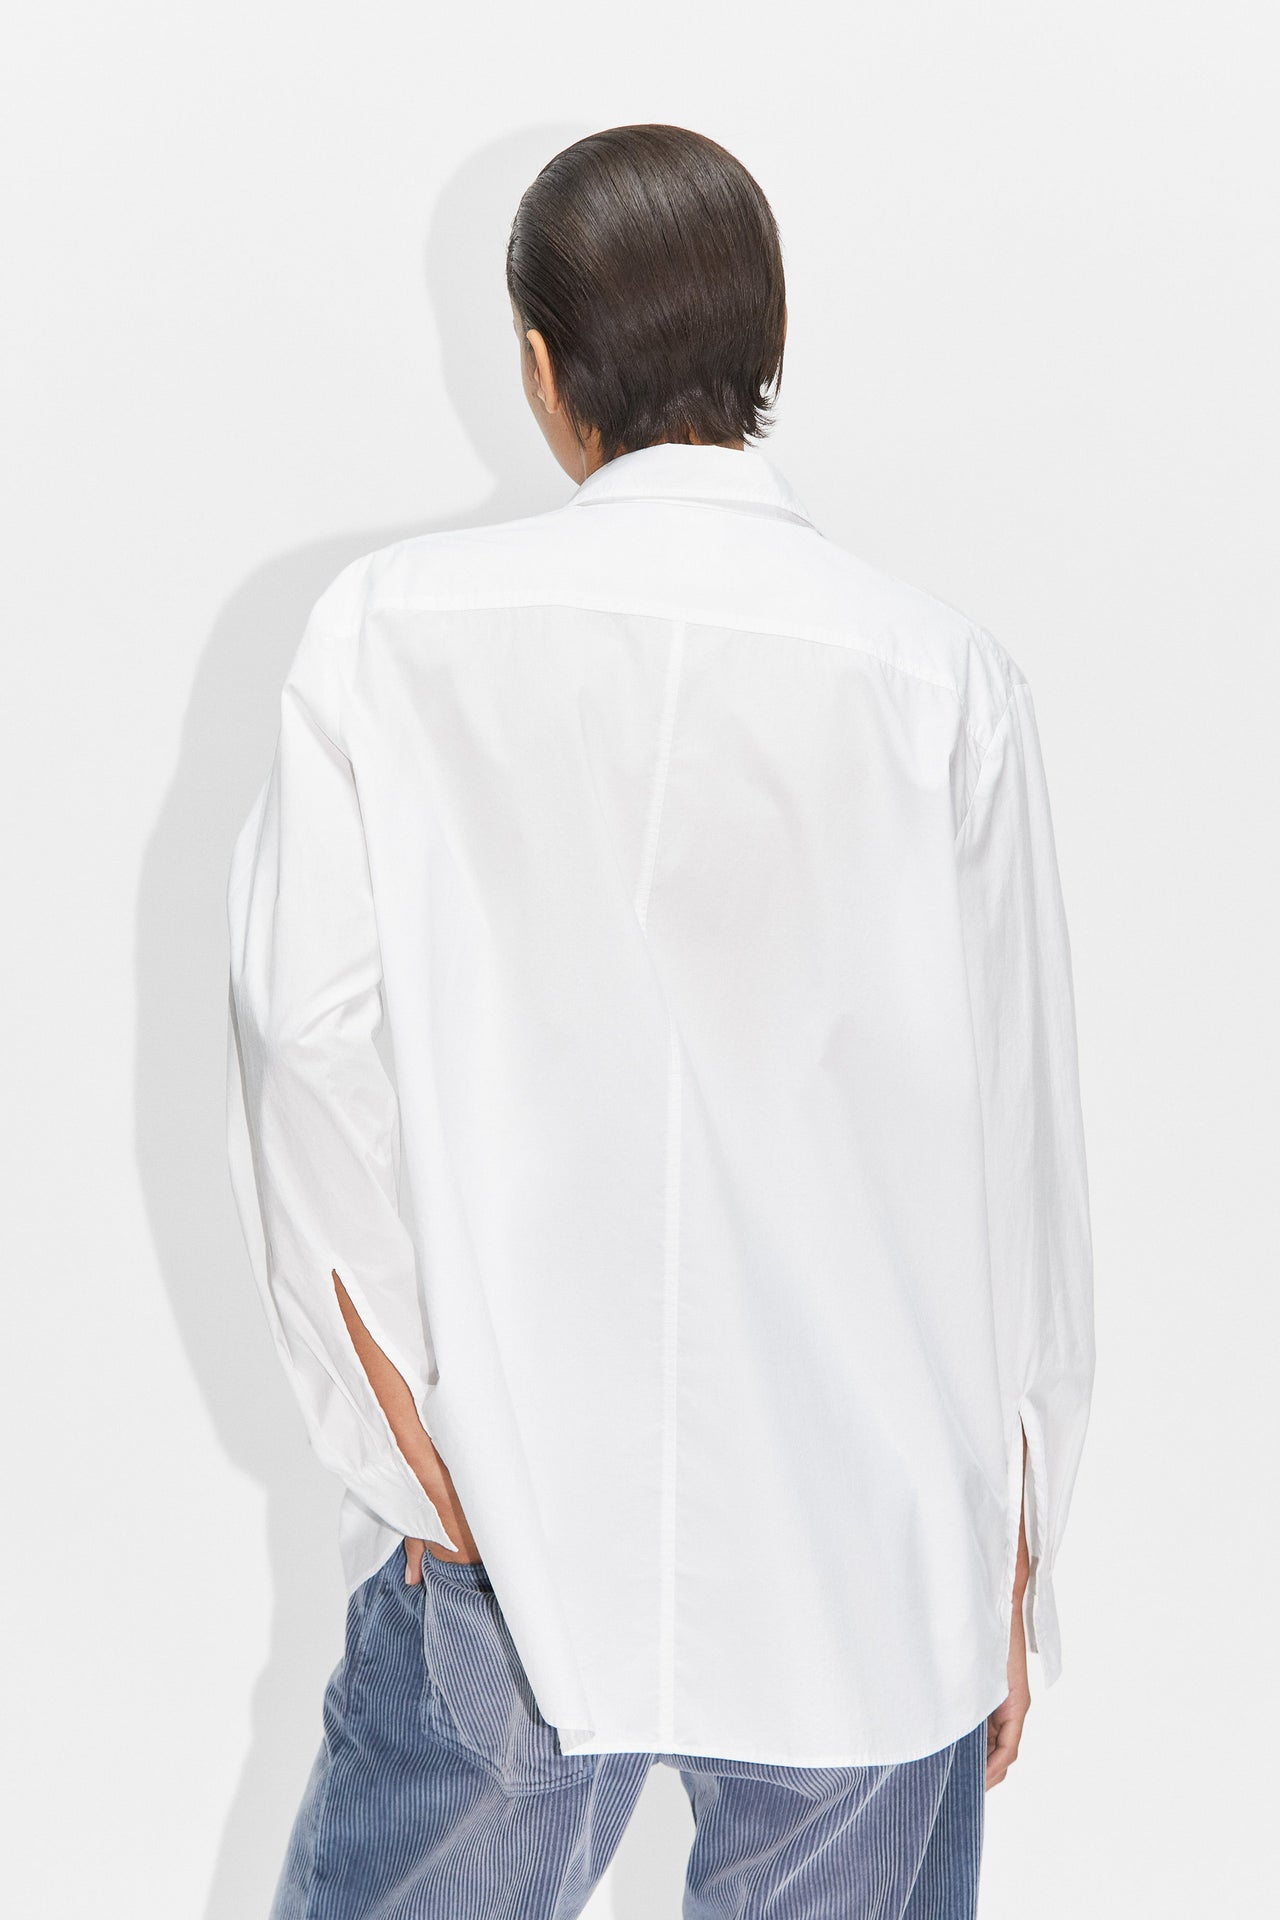 Elma Edit Shirt in white by Hope